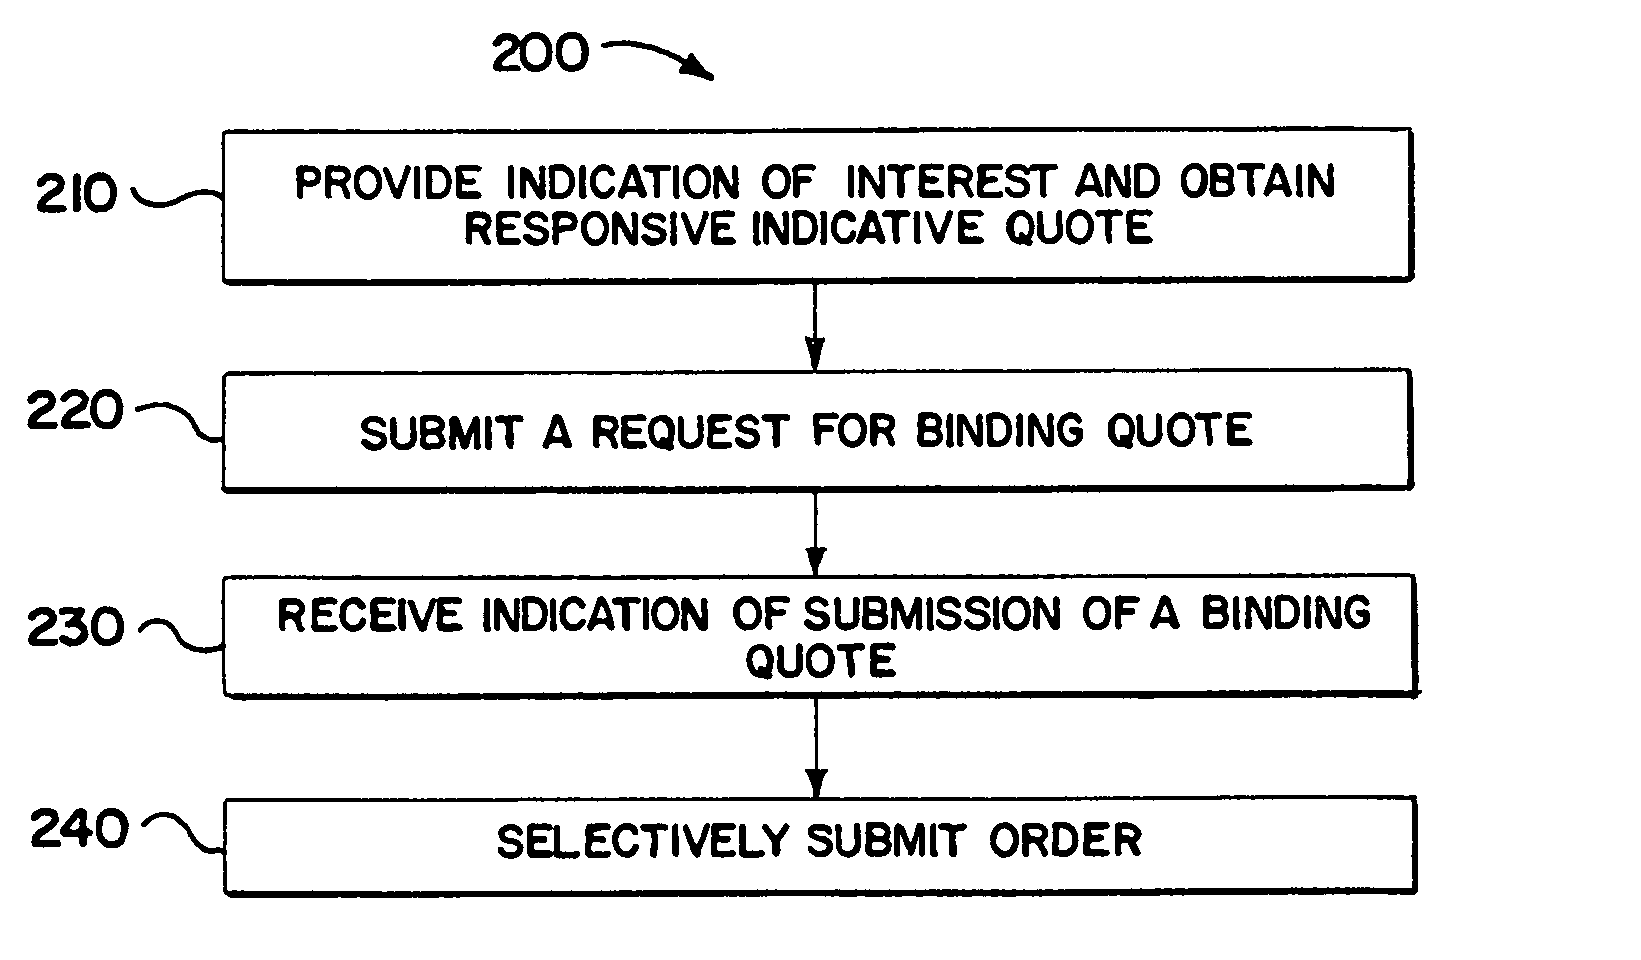 Network and method for trading derivatives by providing enhanced RFQ visibility